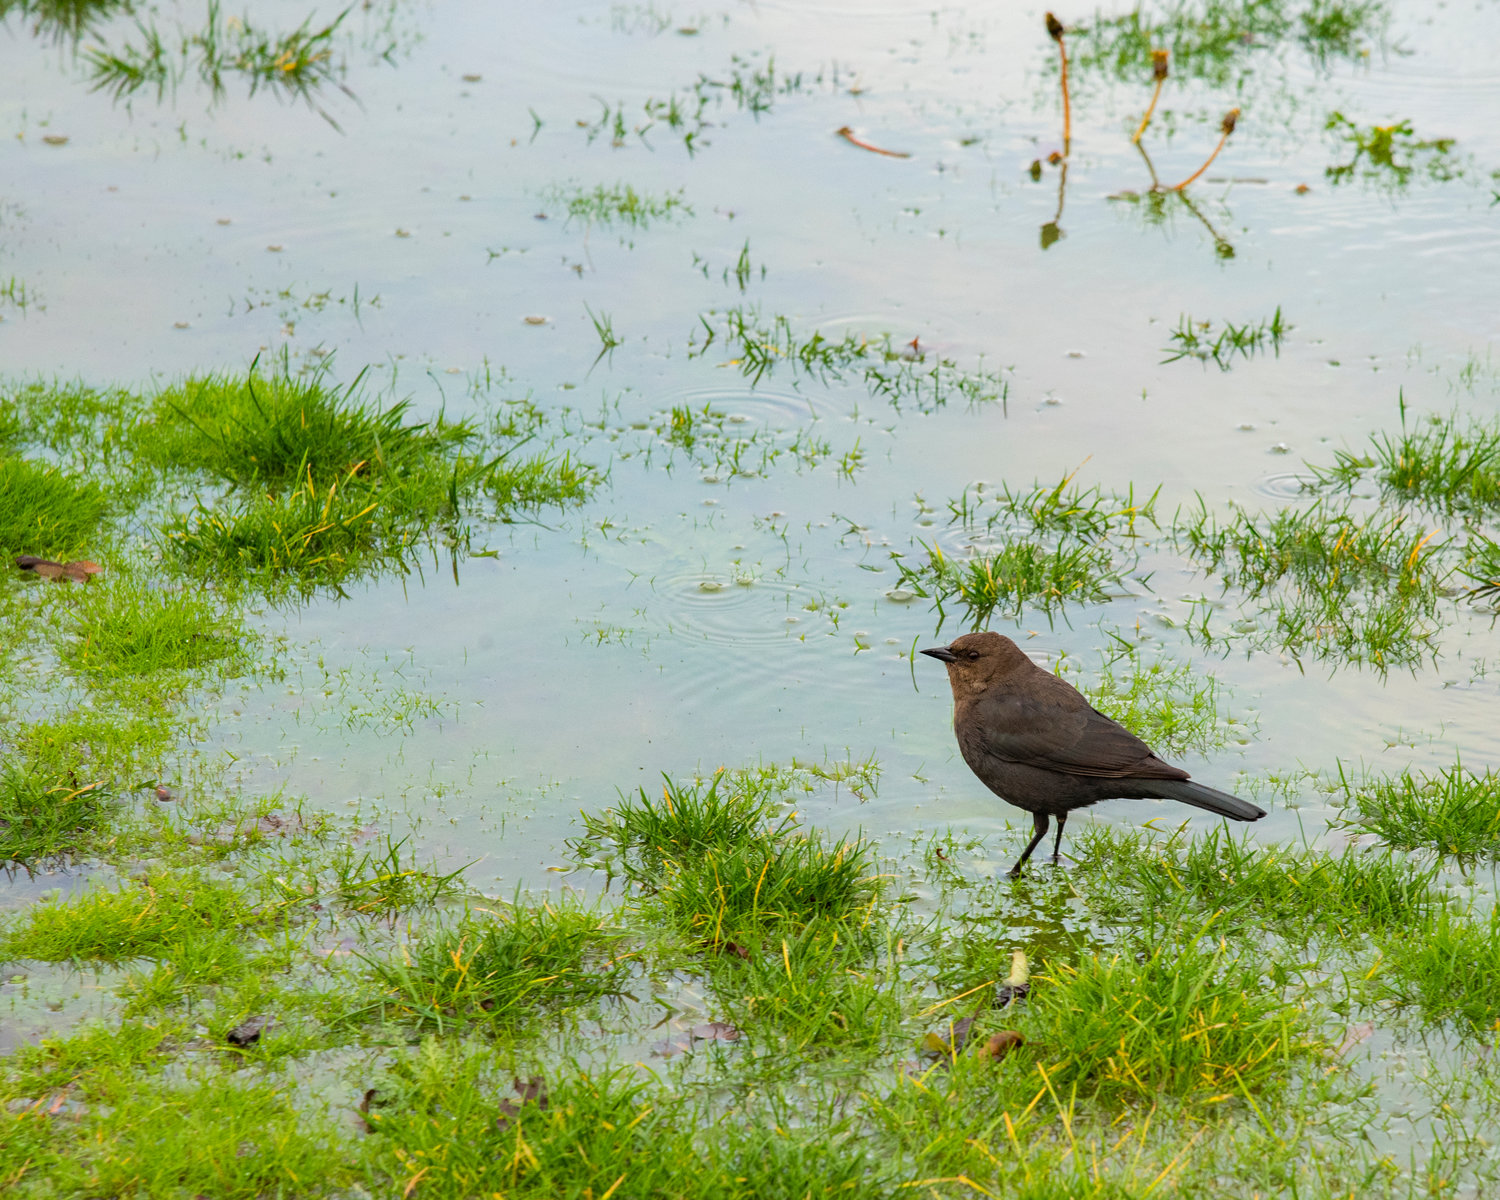 A bird hunts for insects in islands of grass amongst floodwaters in Centralia on Friday.